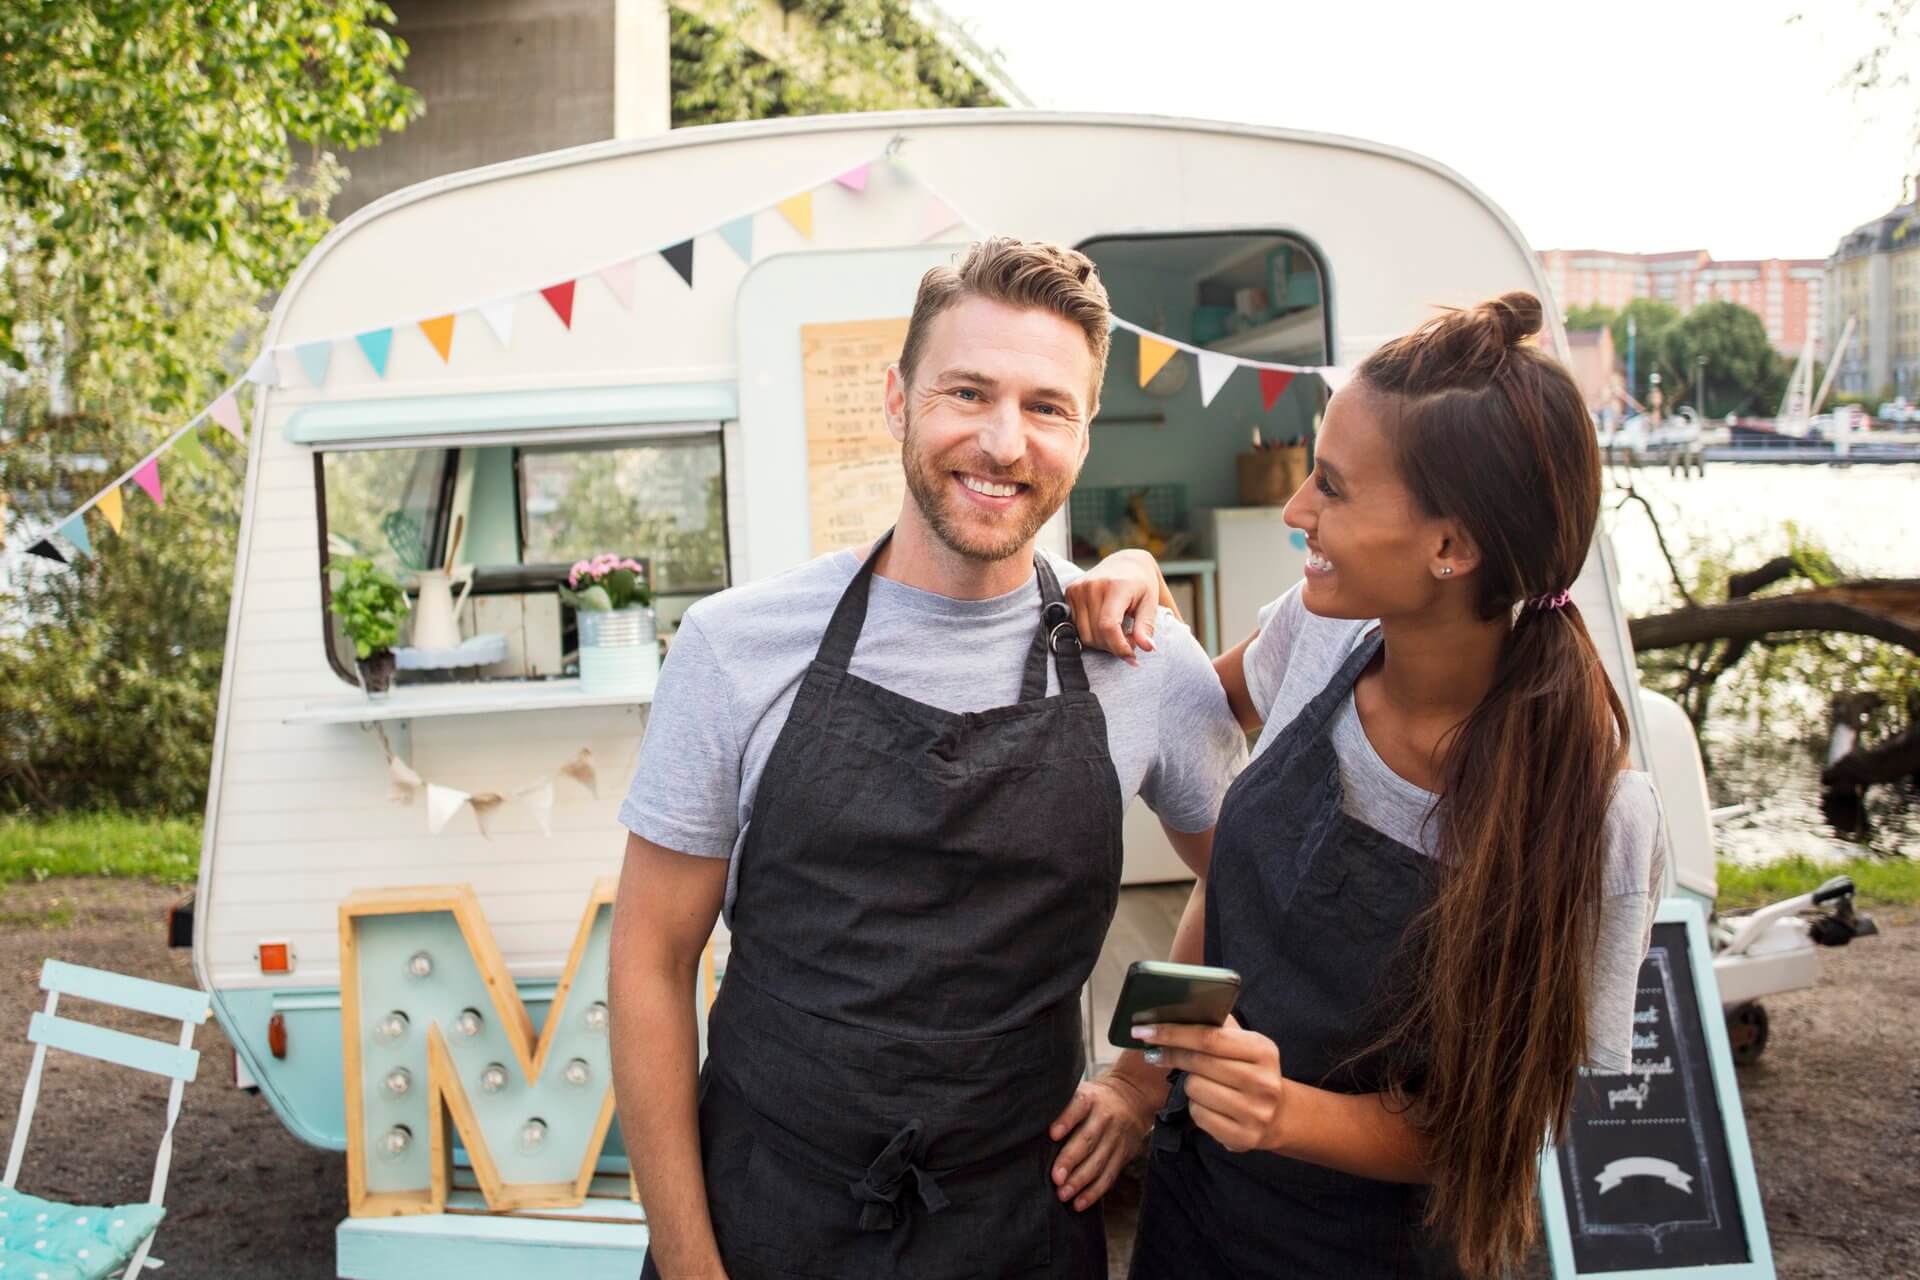 two people wearing aprons in front of a coffee van